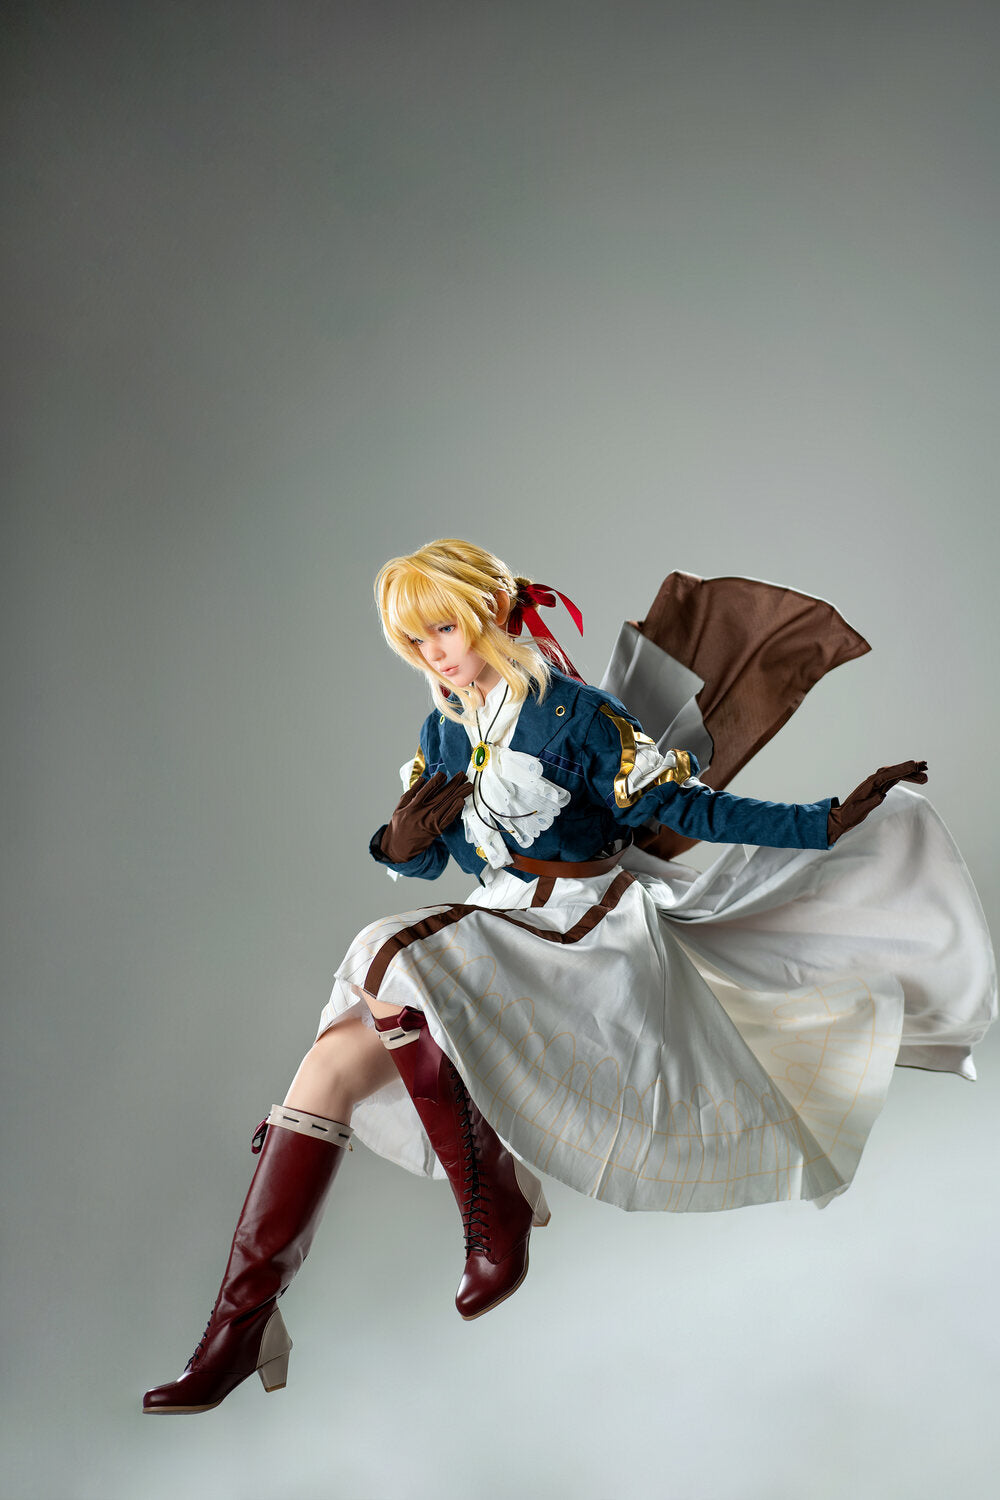 GAME LADY 156cm/5ft1 F-cup Bambola sessuale in silicone Violet Evergarden